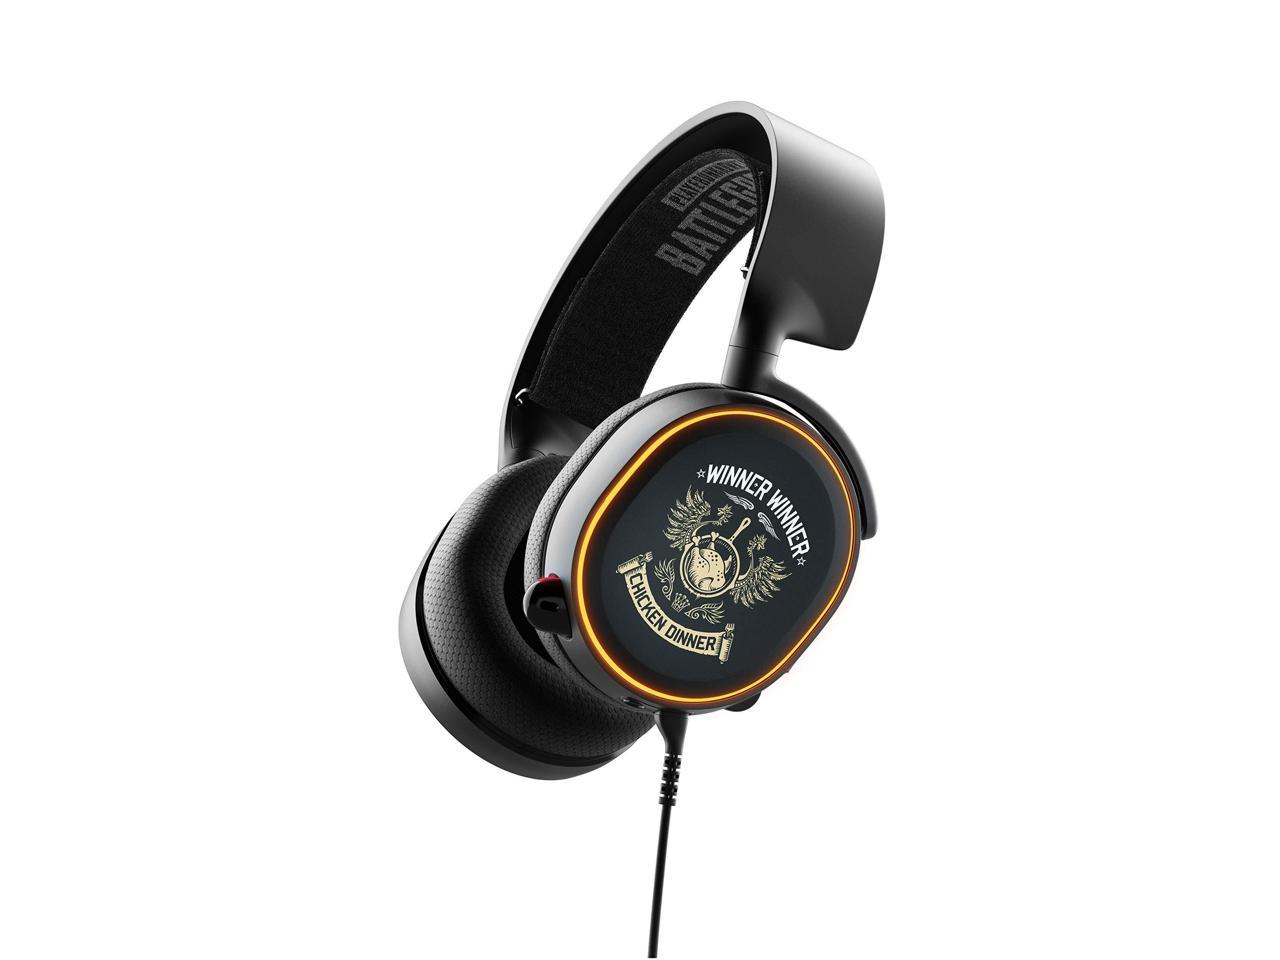 stil Vrijwel patroon SteelSeries Arctis 5 PUBG Limited Edition - RGB Illuminated Gaming Headset  with DTS Headphone:X v2.0 Surround - For PC and PlayStation 4 - Newegg.com